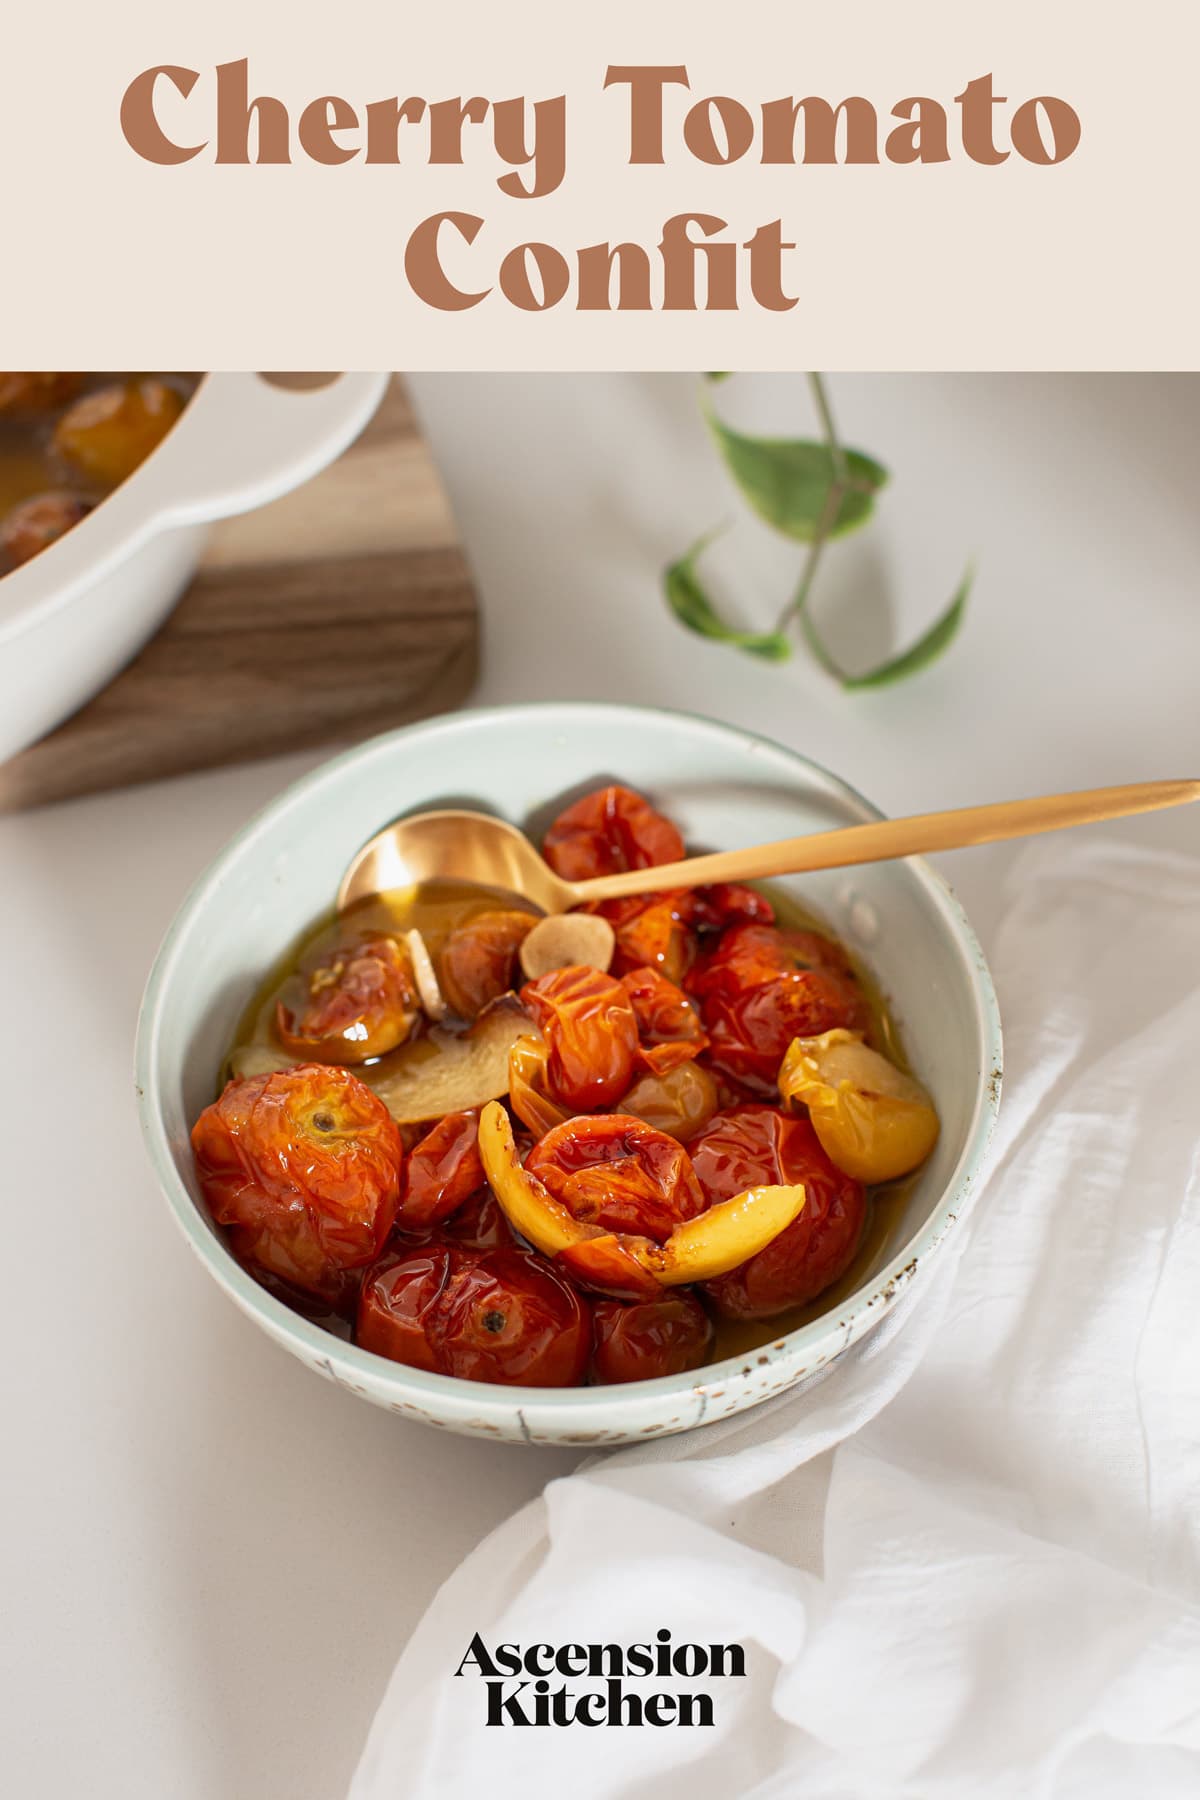 Hero image of a bowl of confit tomatoes in olive oil, with a golden spoon. The recipe title is printed over the top, for pinterest